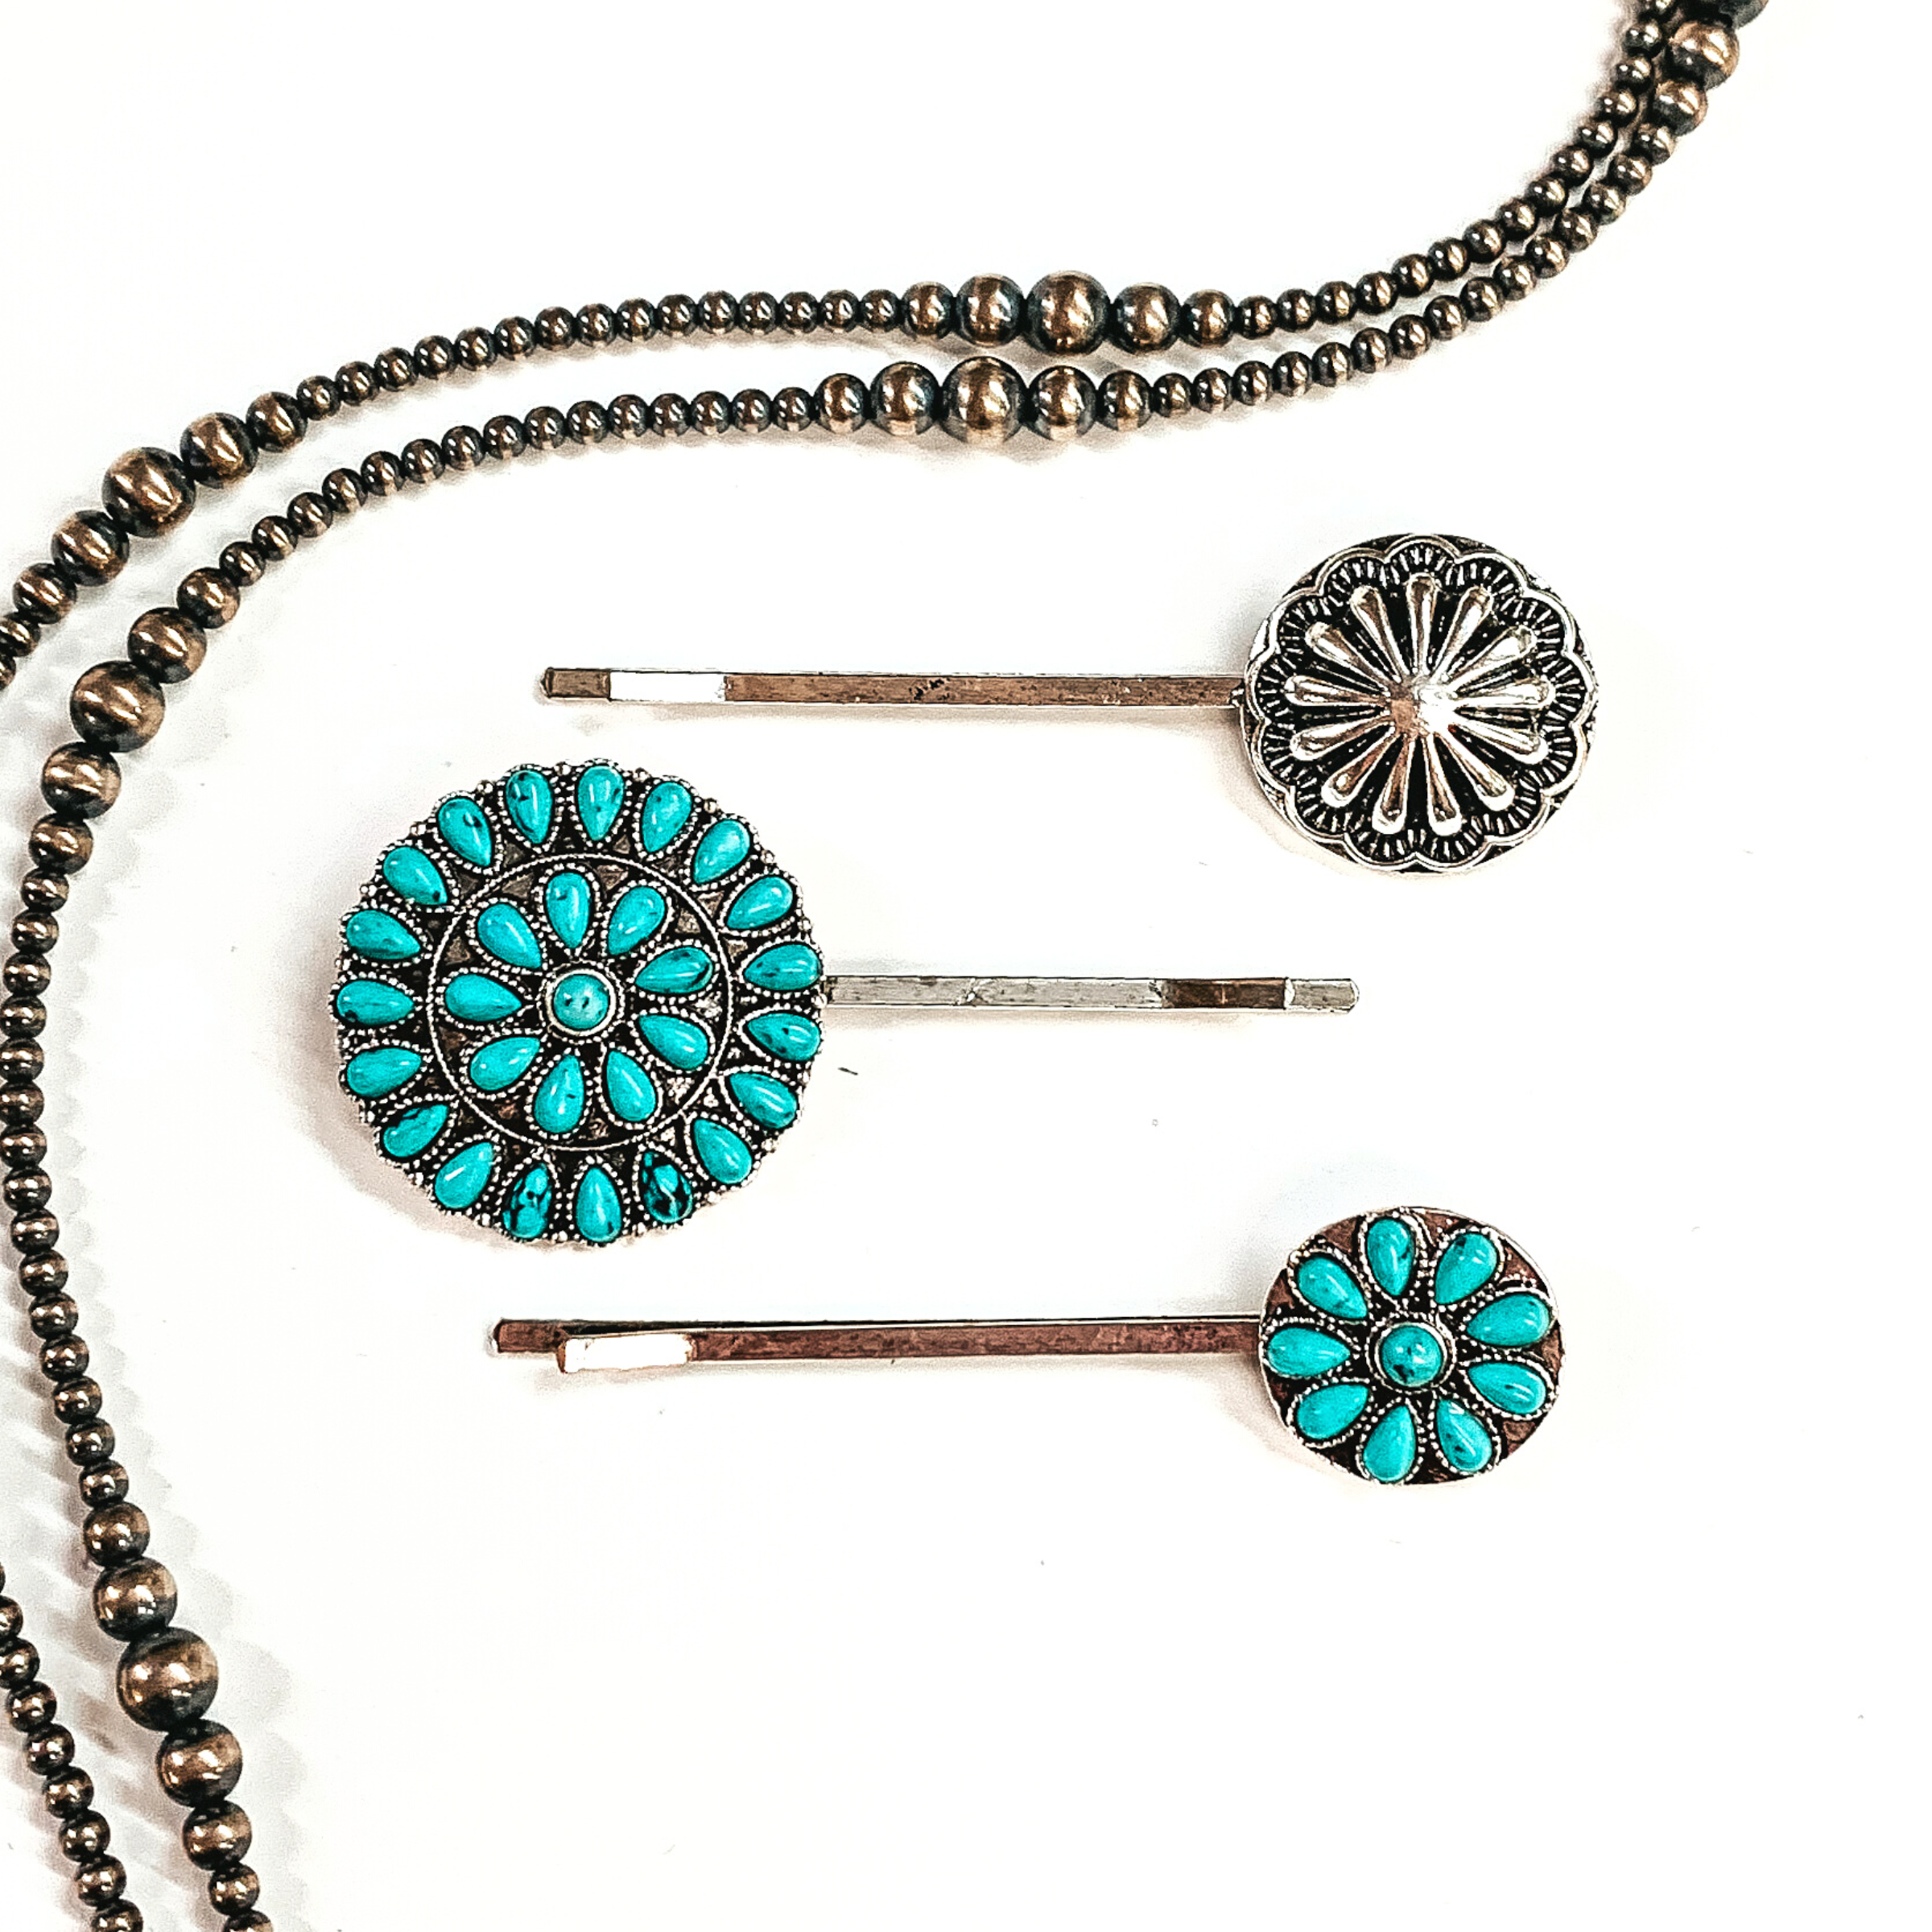 There are three silver bobby pins with conchos and faux turquoise clusters. From  top to bottom; silver concho, large circle stone cluster, small circle stone cluster. These bobby pins are taken on a white background  with silver navajo pearls around as decor.